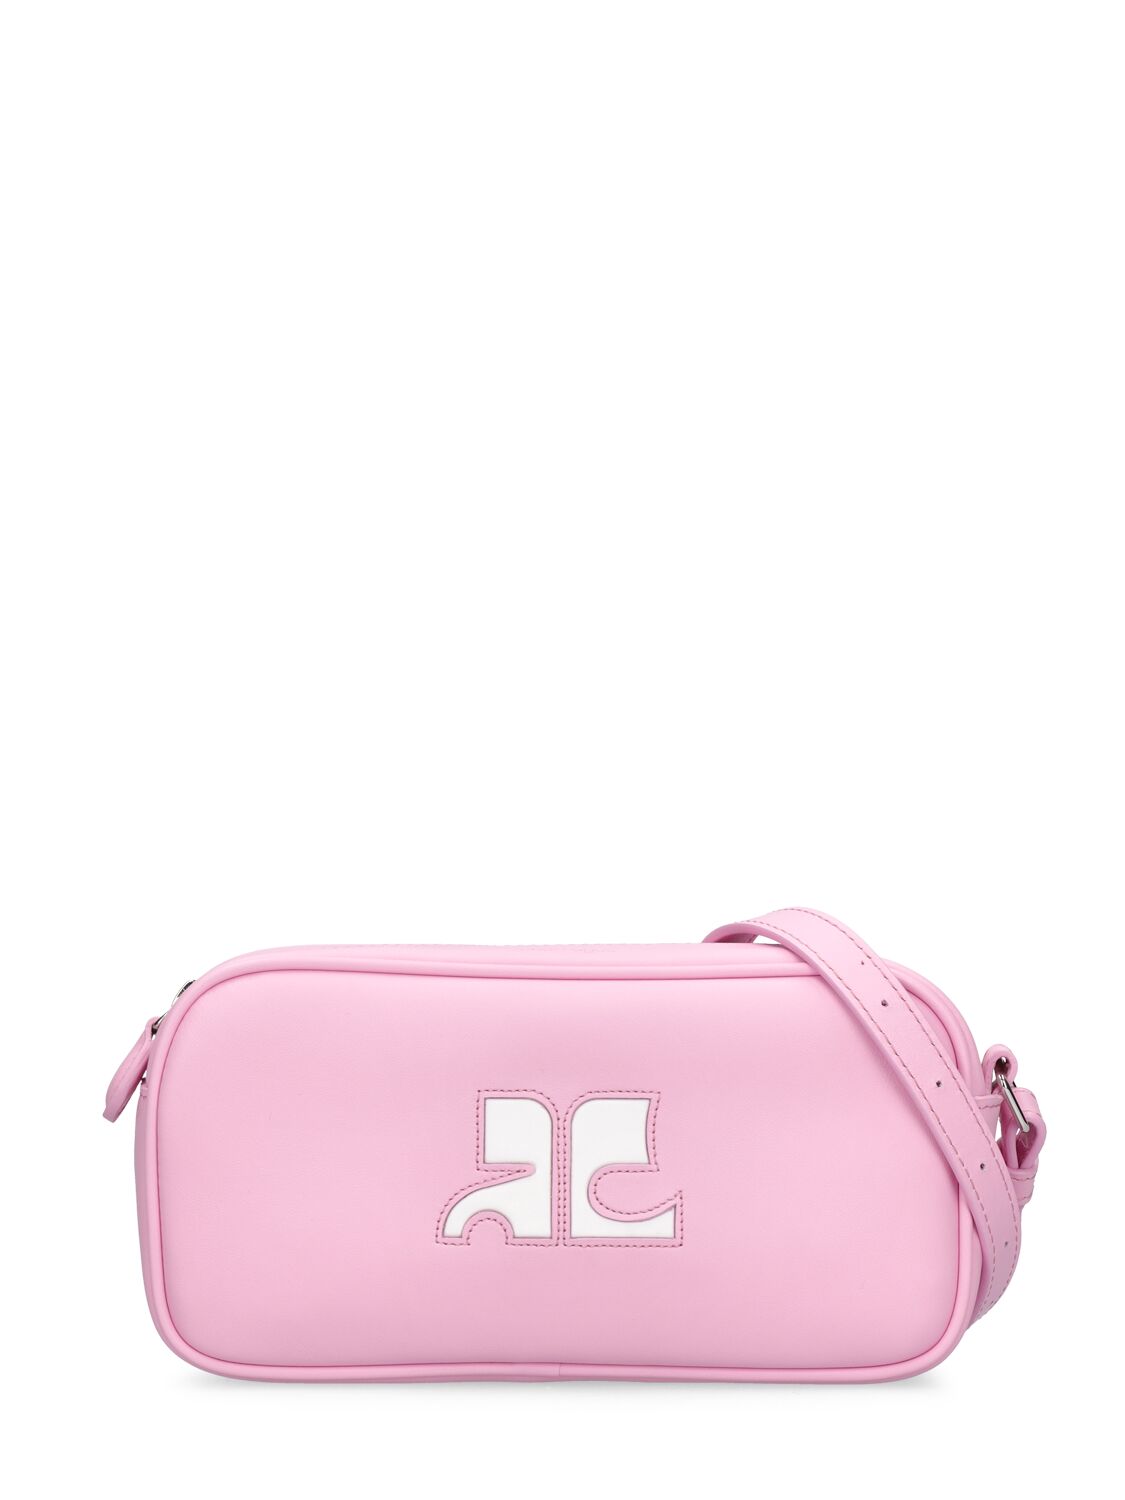 Courrèges Ac Leather Shoulder Bag In Candy Pink